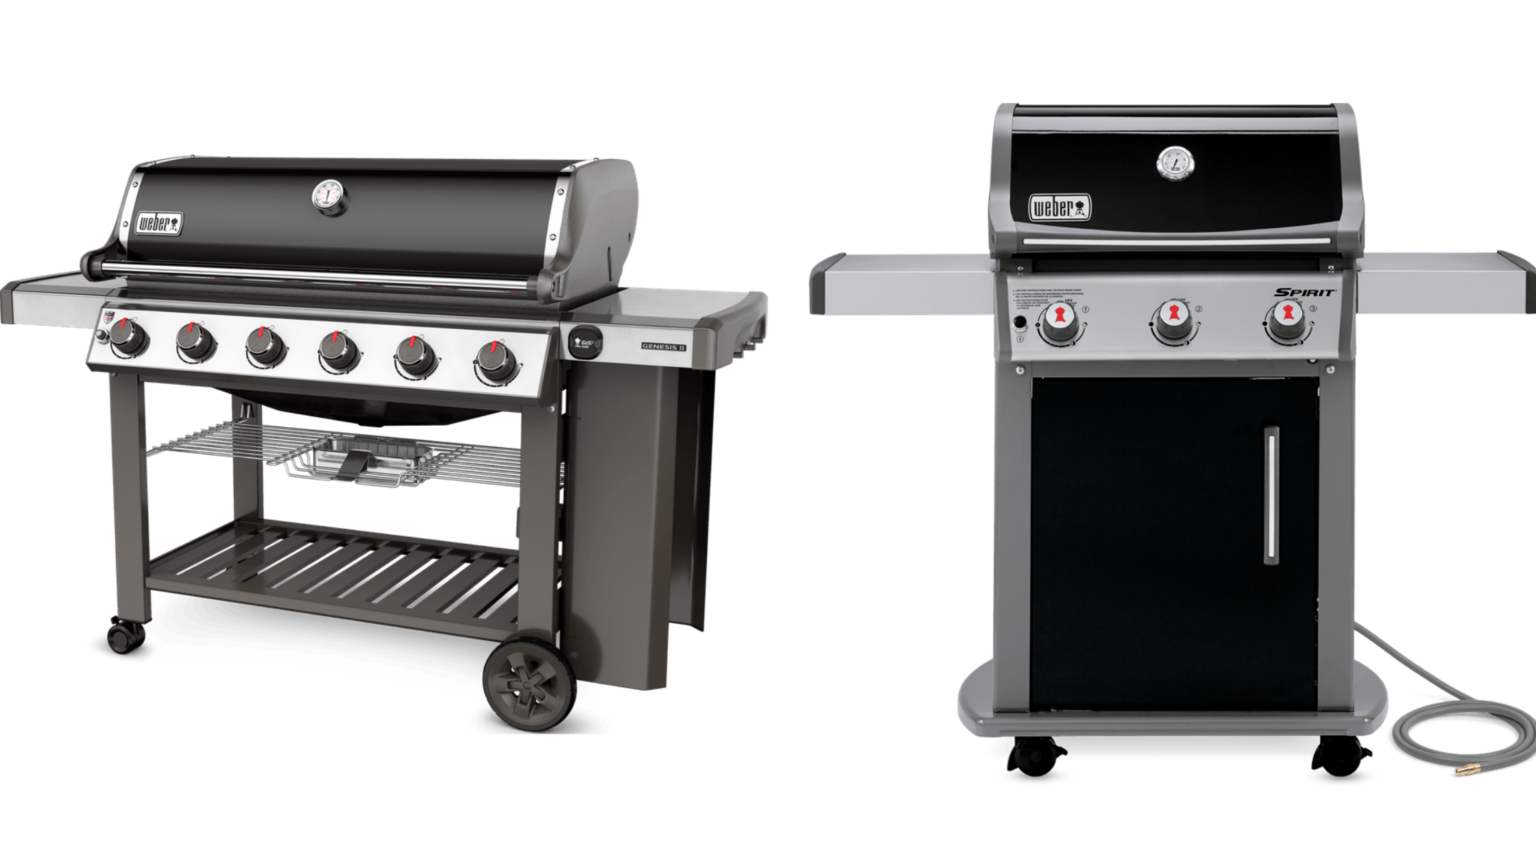 What is the Best Time to Buy a Weber Grill?